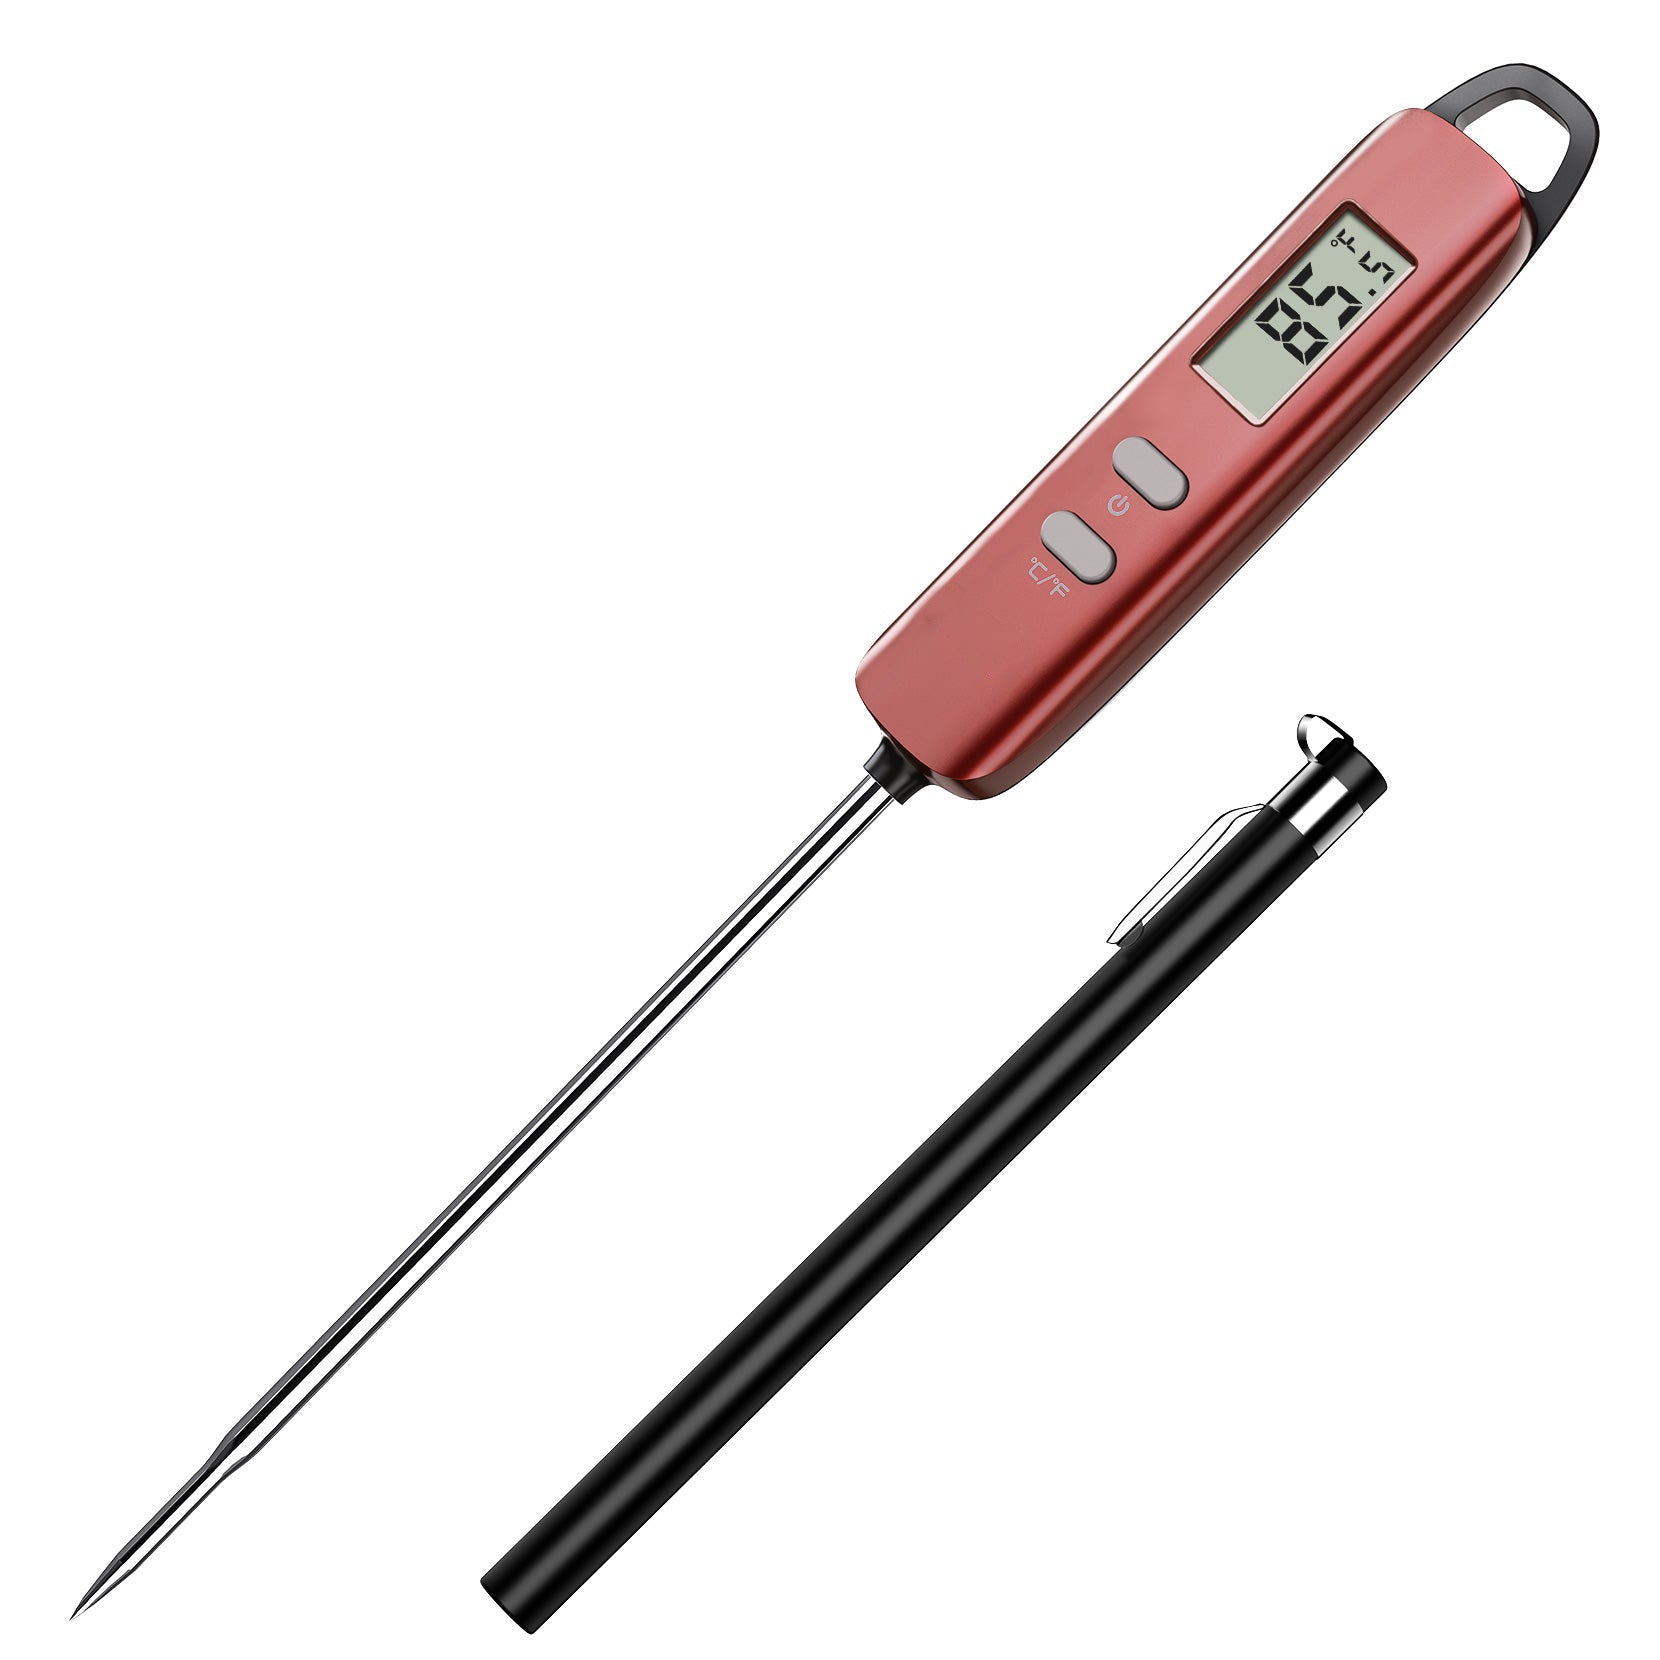 TMGLOBLE™ Kitchen Cooking Digital Meat Thermometer, Multi